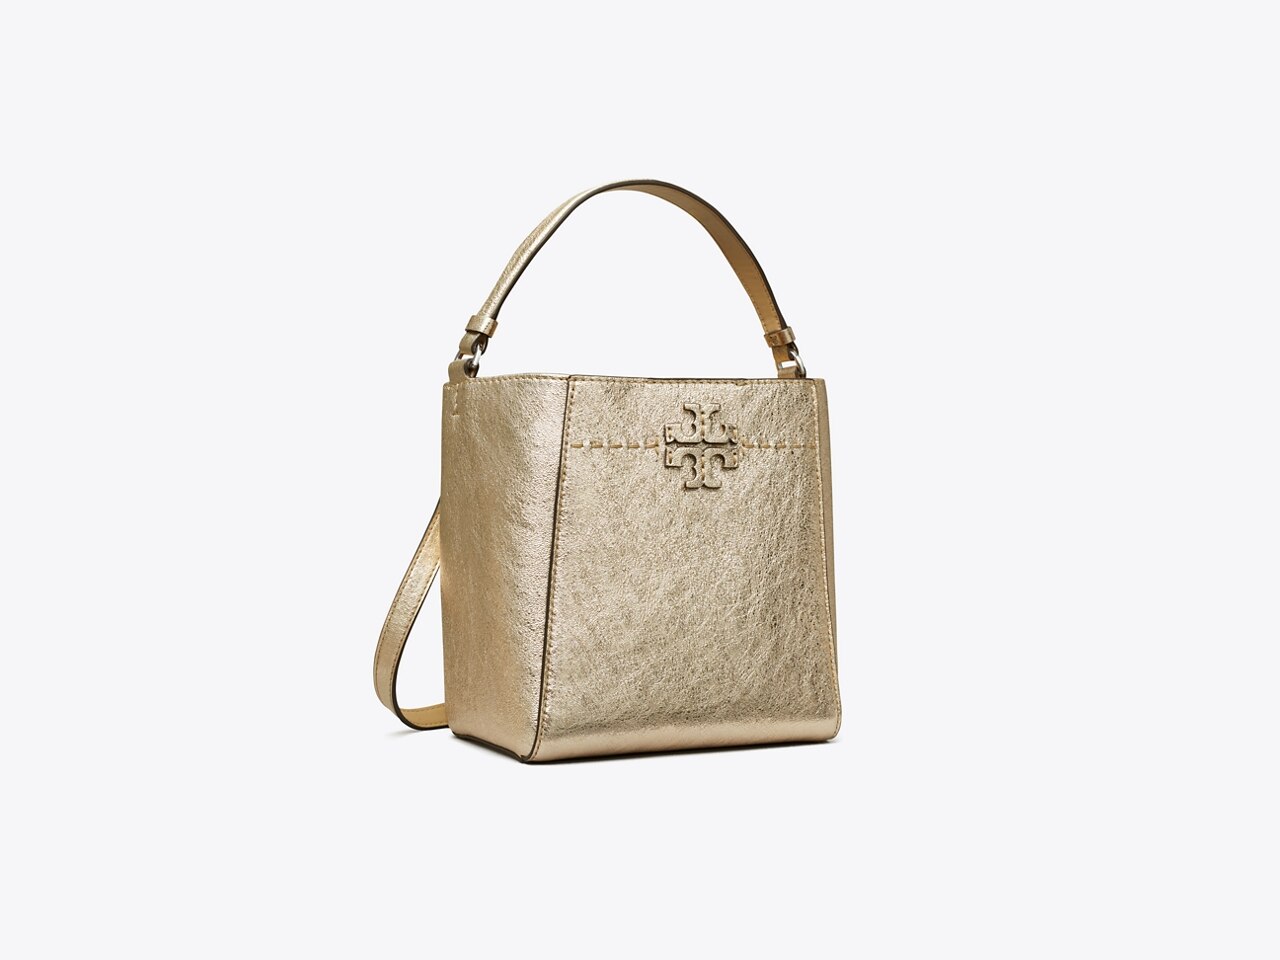 NEW Tory Burch Brie McGraw Small Bucket Bag $348